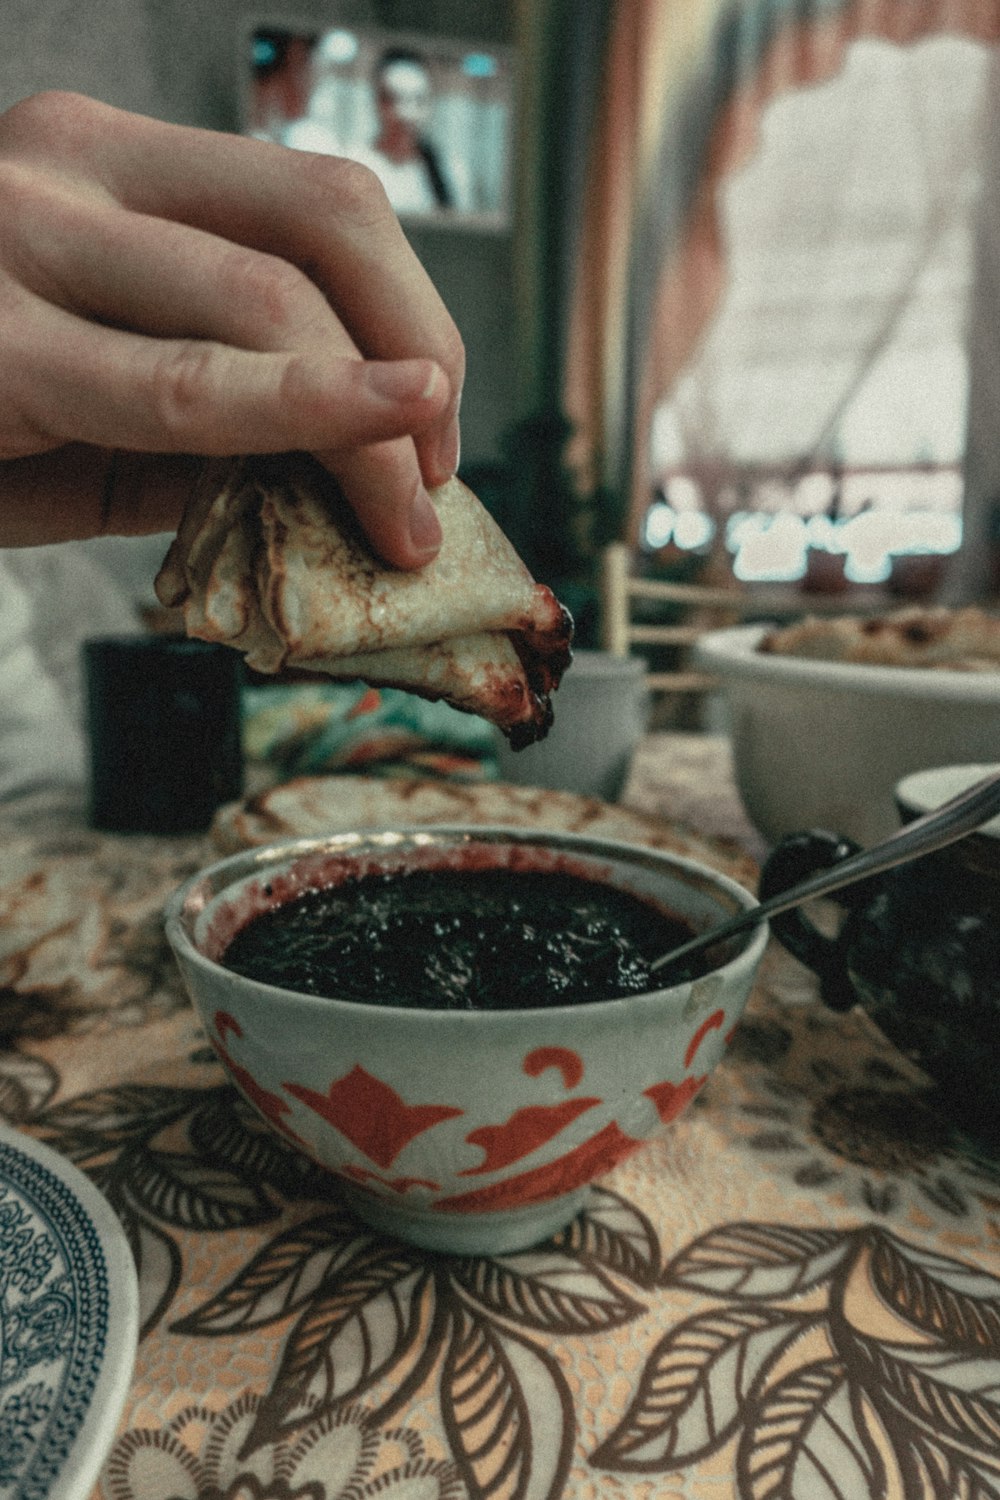 person holding bread near red and white ceramic bowl